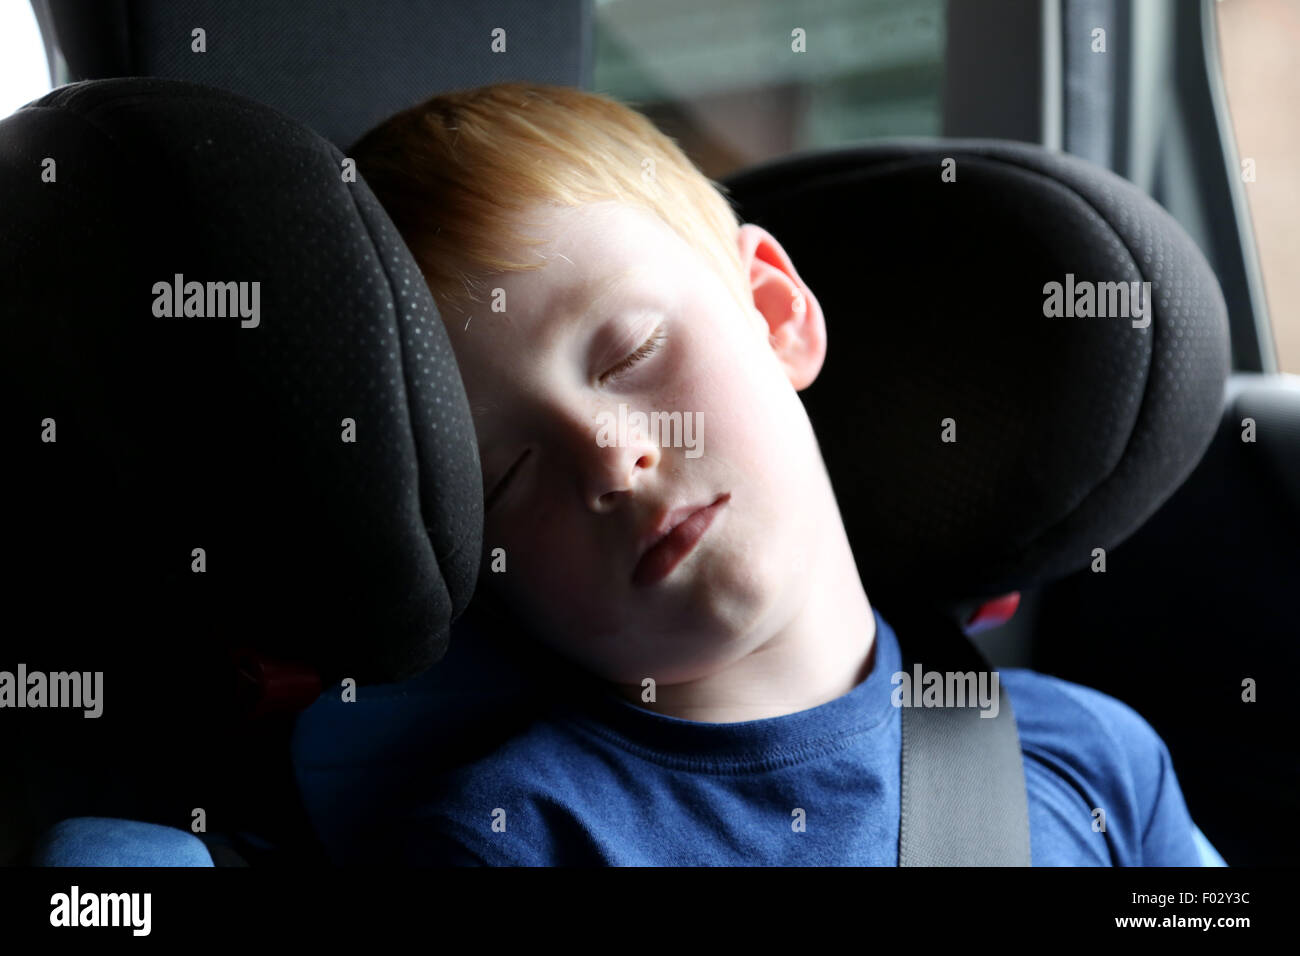 A young child asleep in a childs car seat Stock Photo